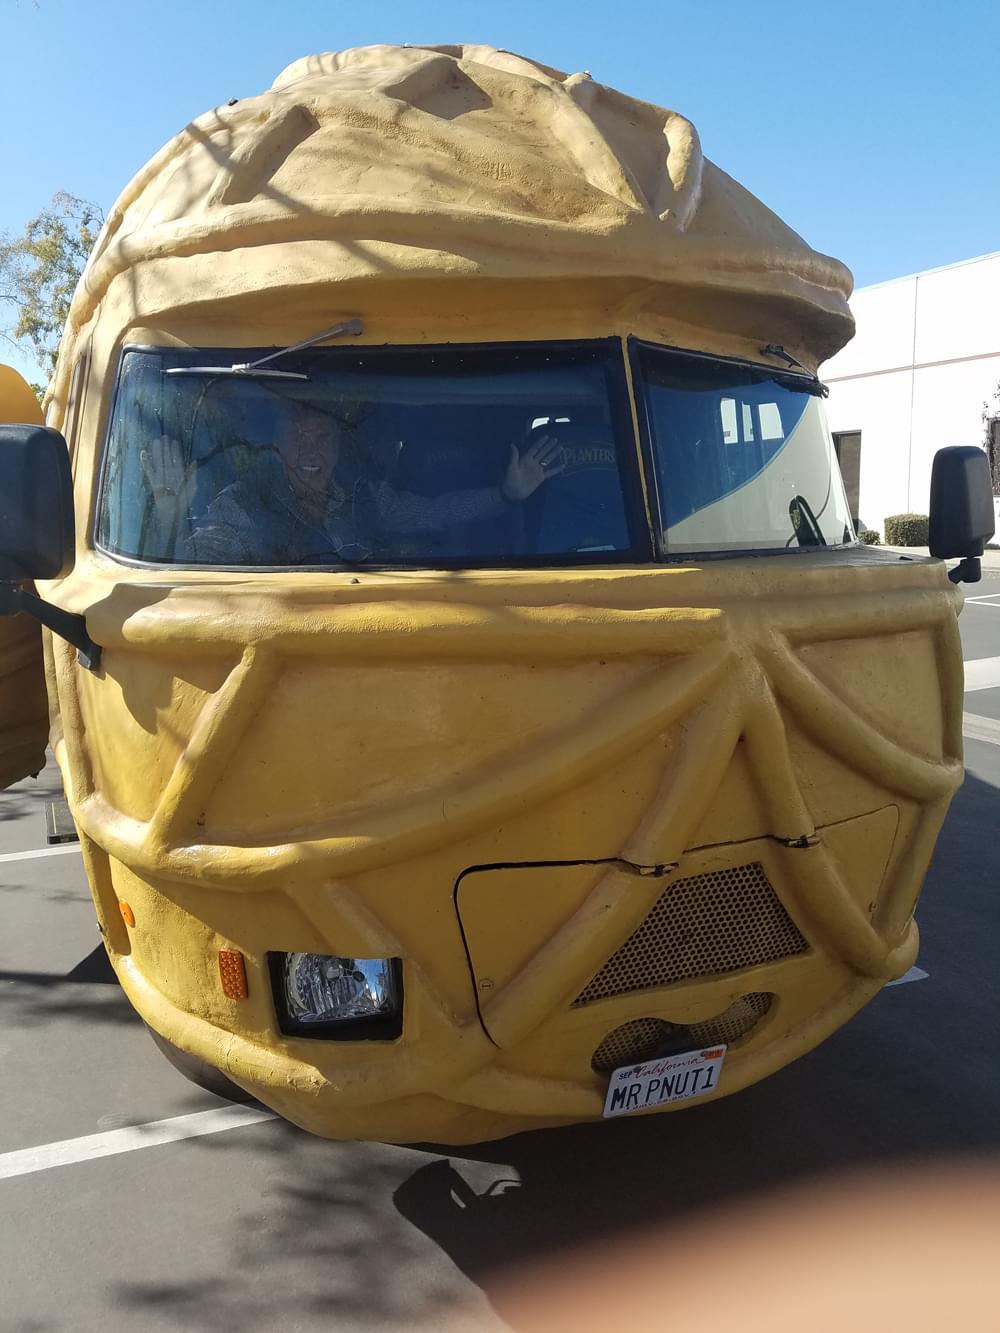 The Planters Nut Mobile hits Bakersfield along with three young nut ambassadors